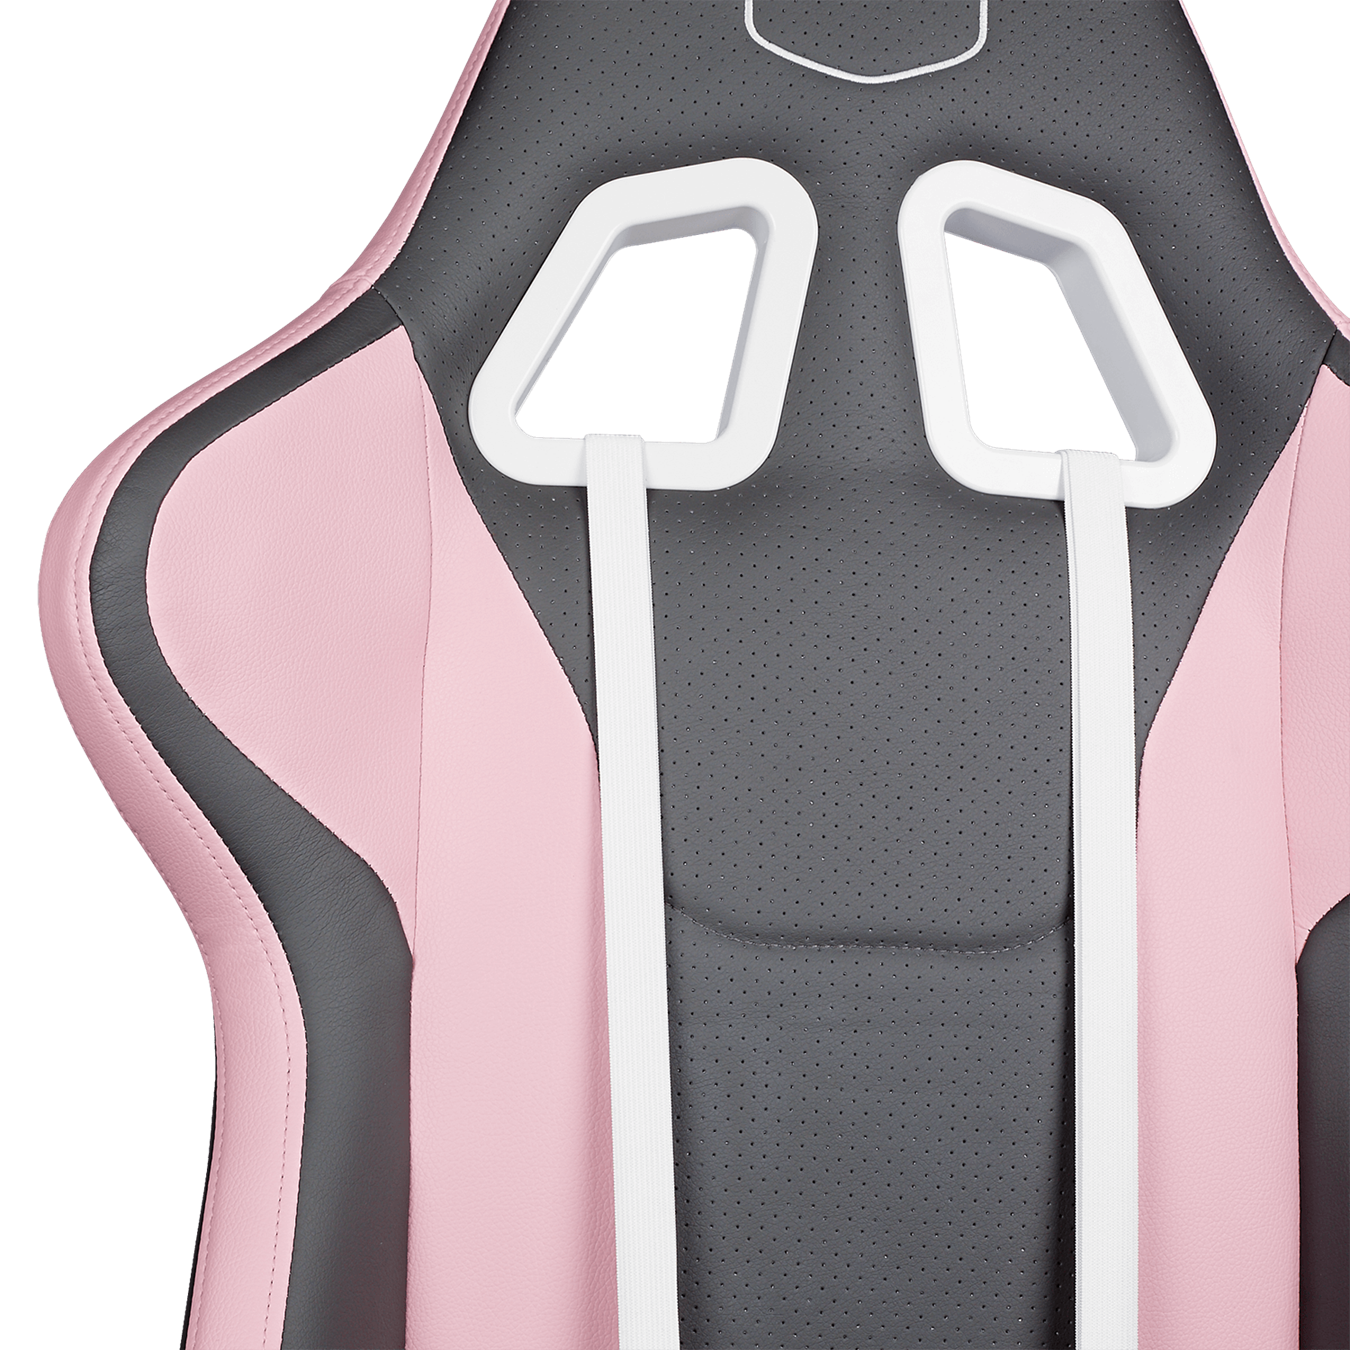 Caliber R1S Rose Grey Edition Gaming Chair - The breathable PU provides maximum comfort for all body types and keeps you feeling cool and energized at all times.